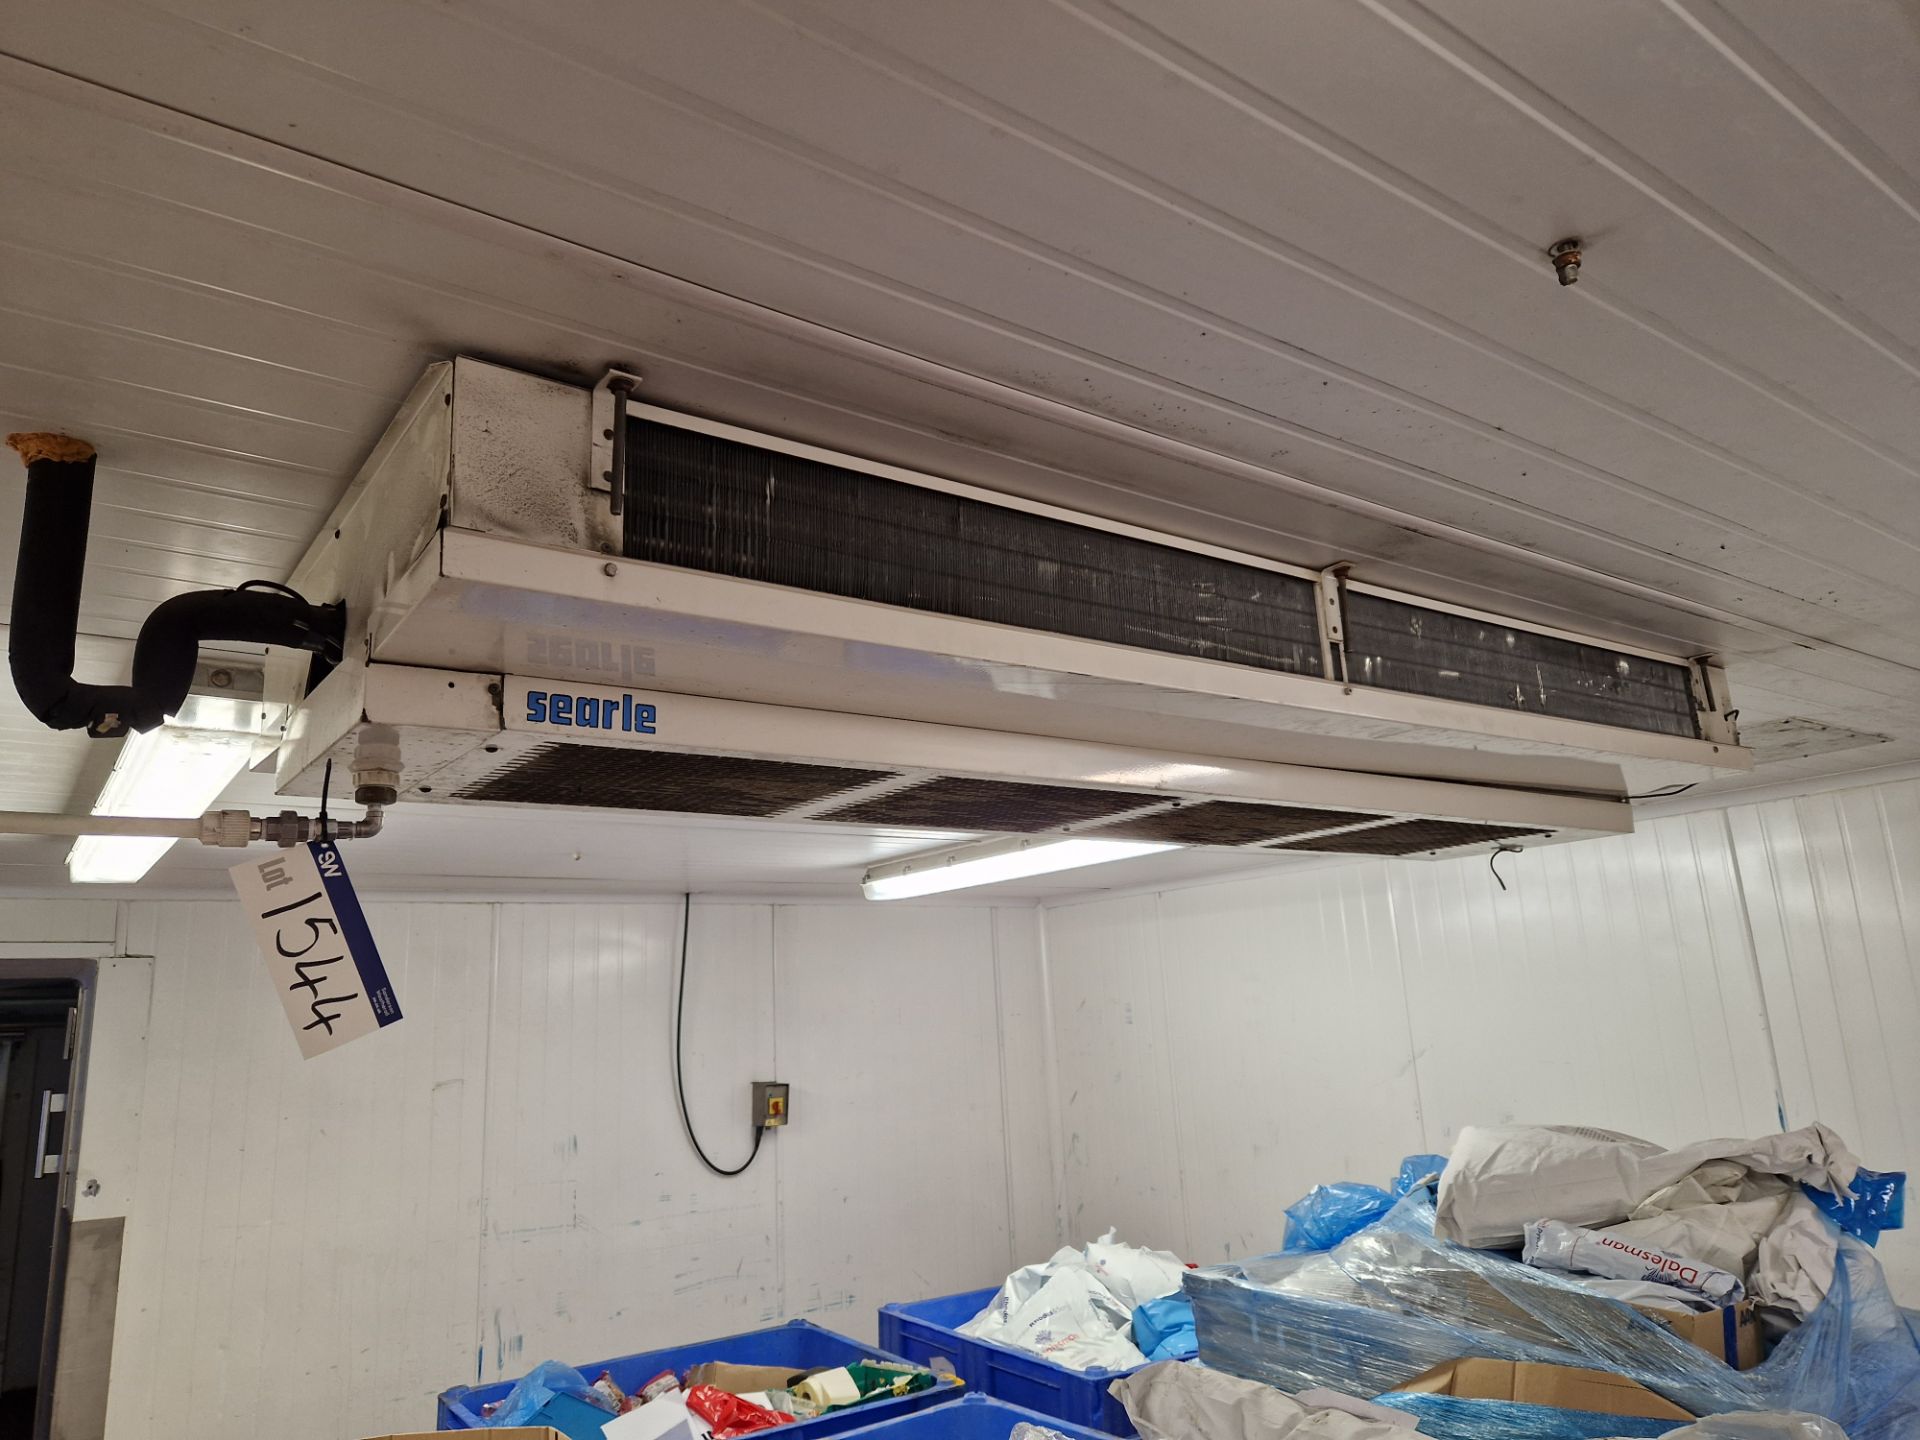 Searle Four Fan Evaporator (Evaporator must be disconnected at closest connection point - No